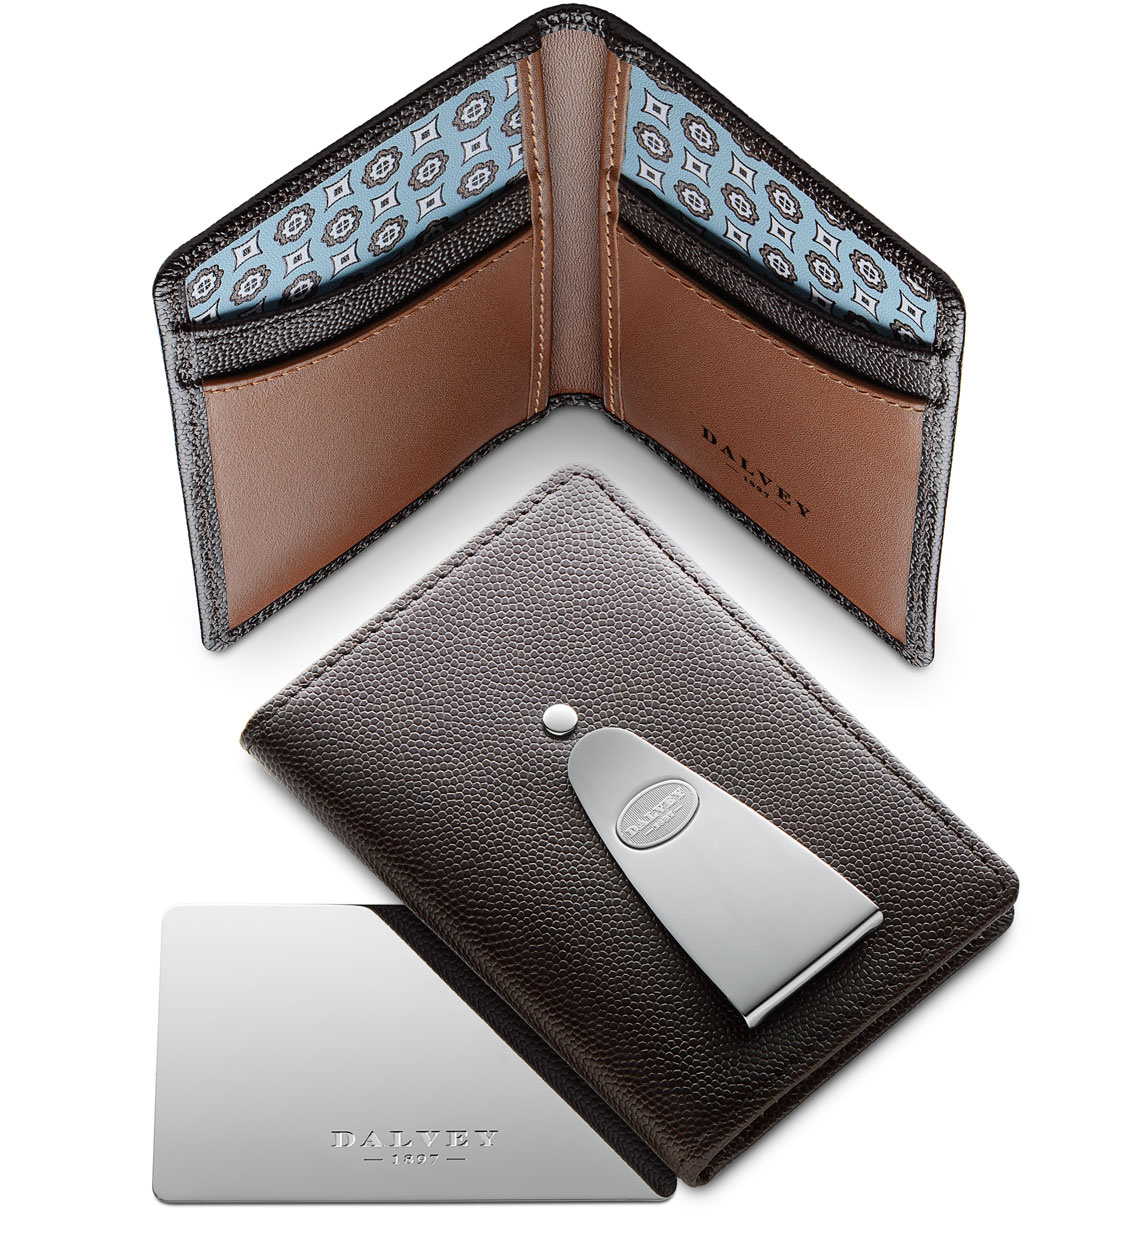 Slim Leather Wallet with Metal Money Clip